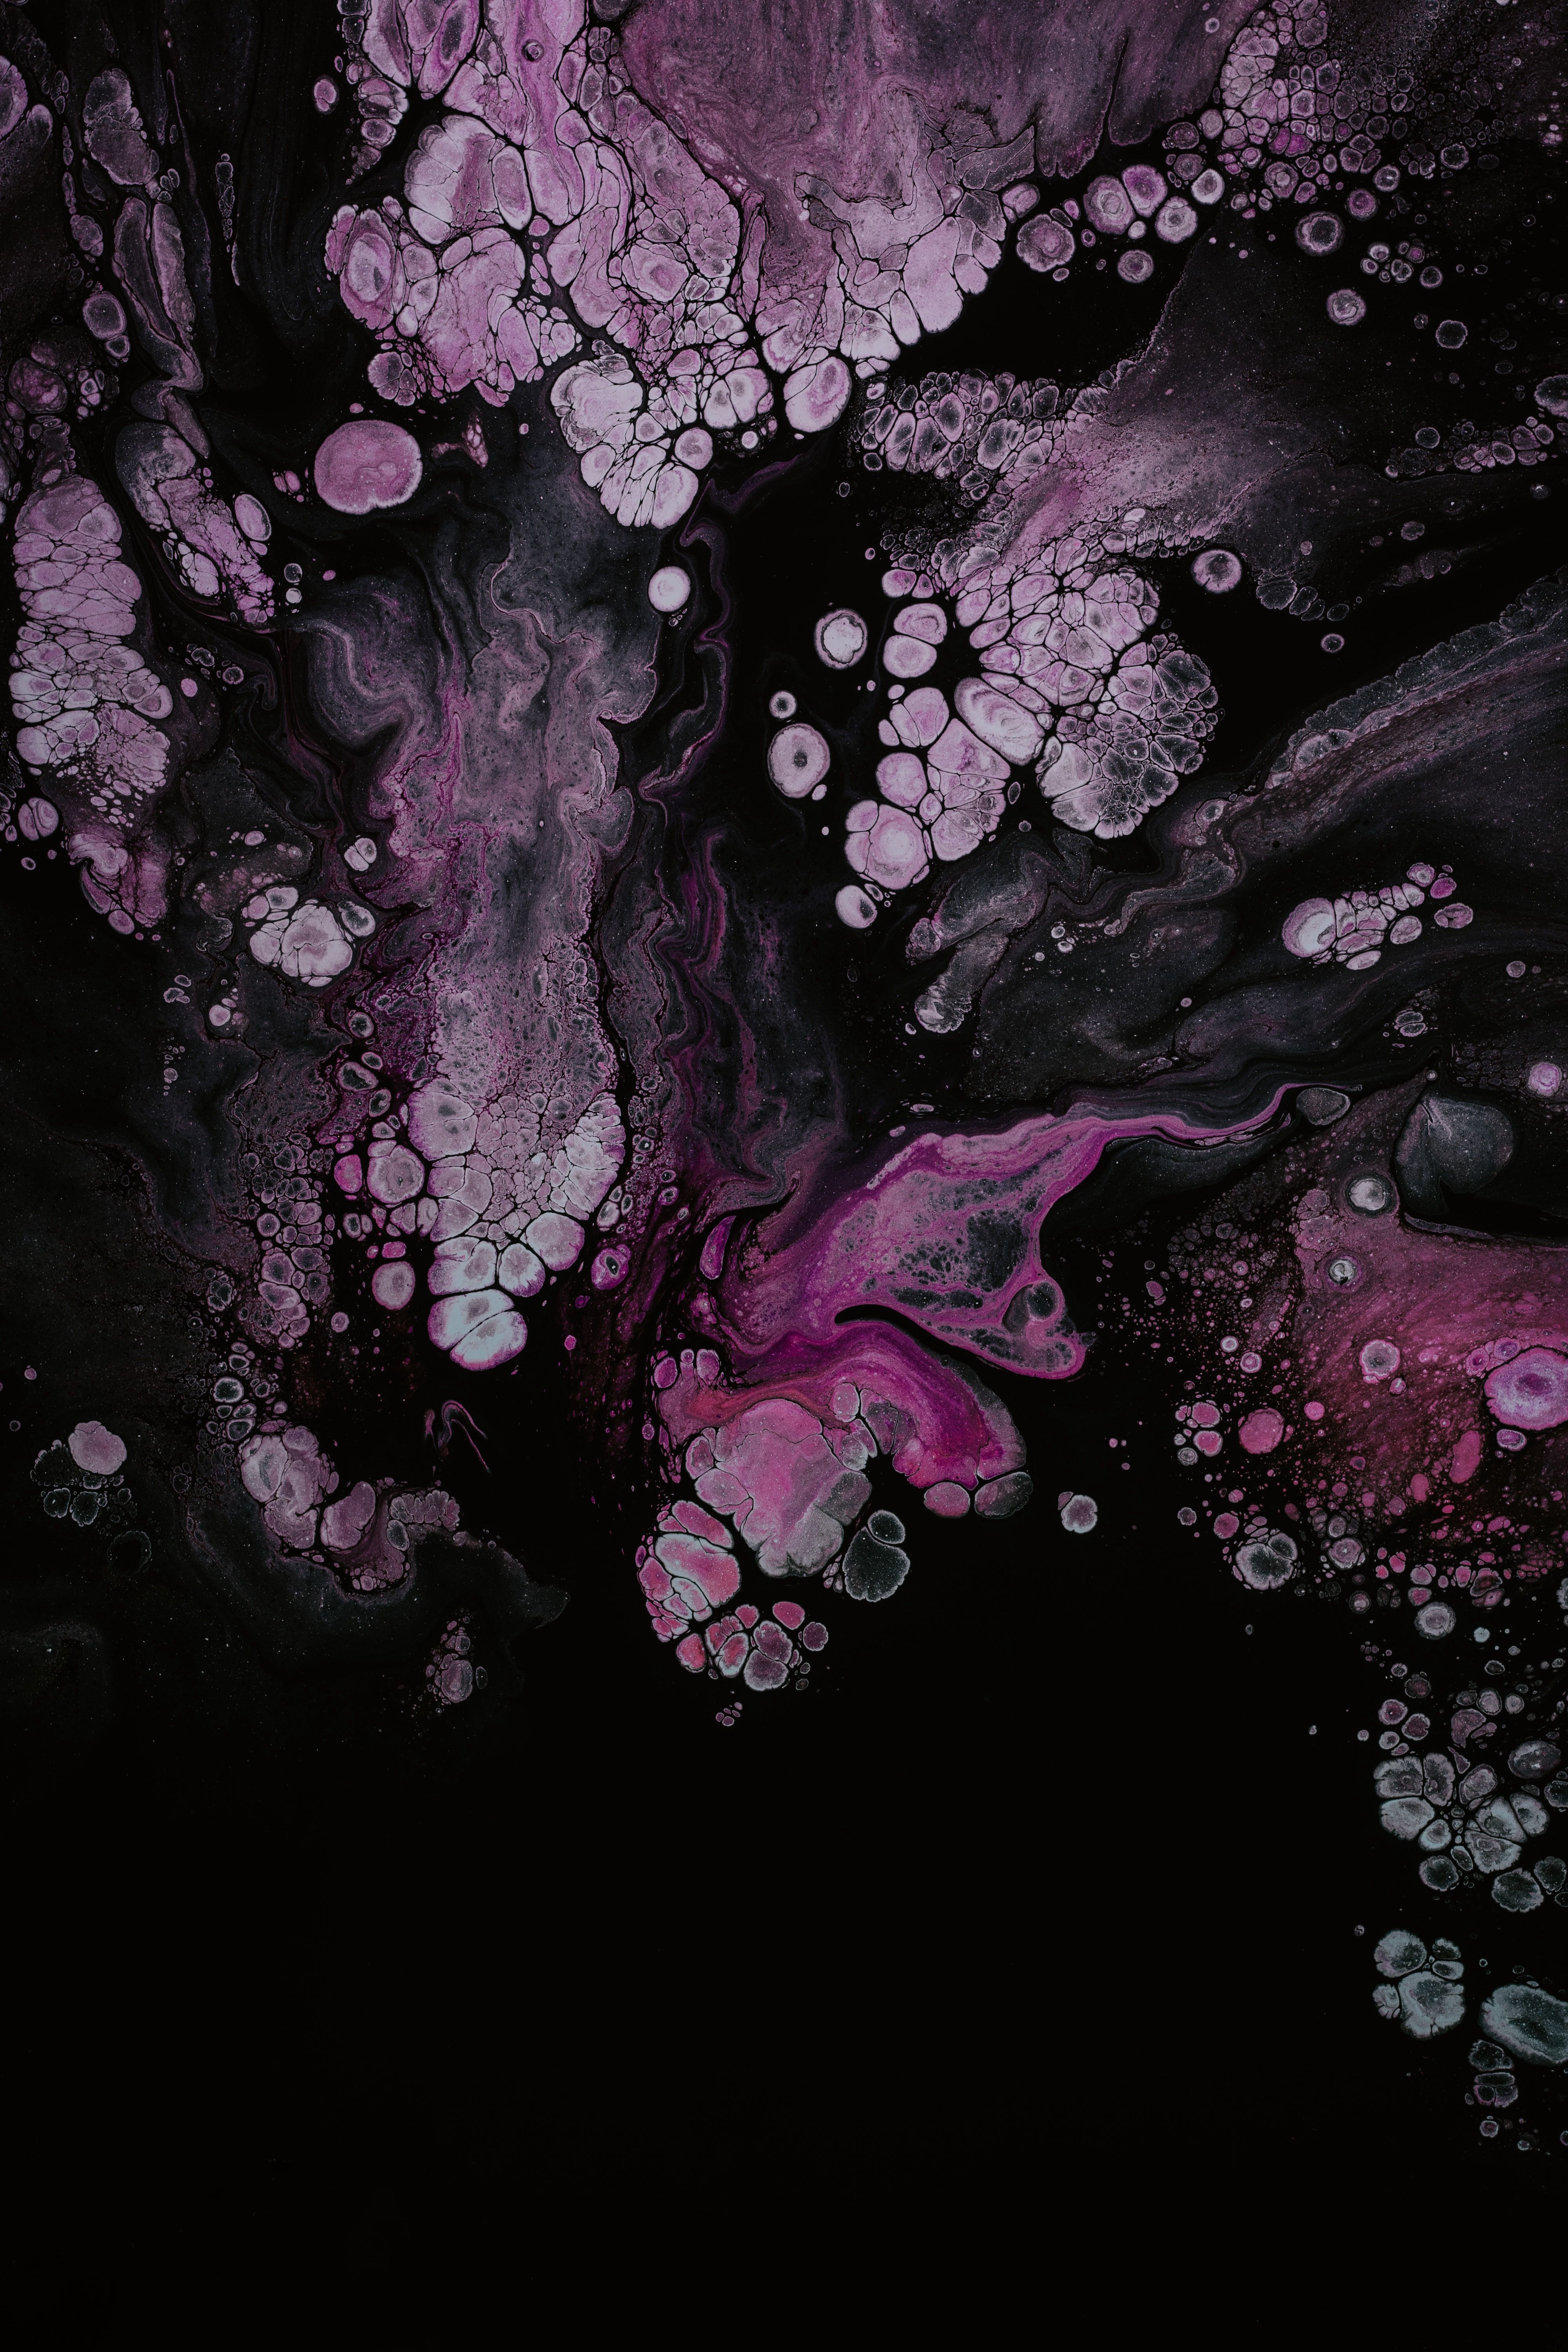 A purple and black painting of clouds - Bubbles